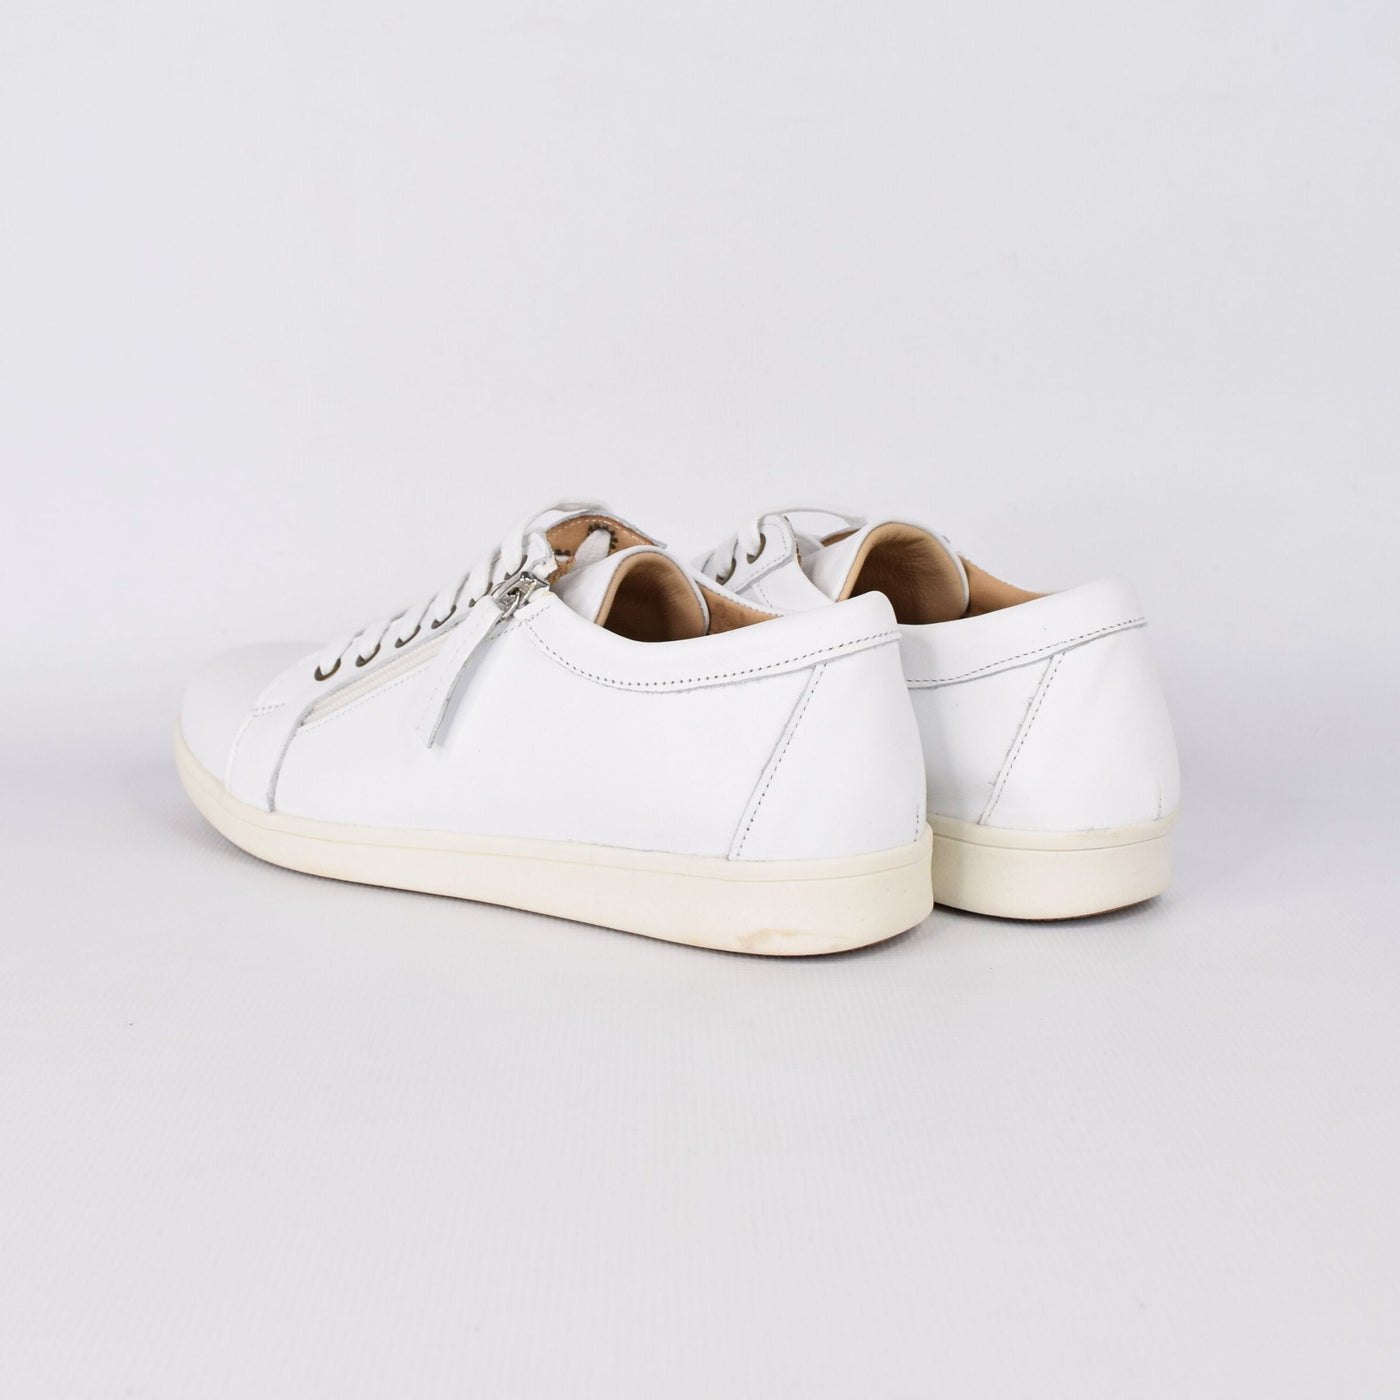 Hami White by Tesselli | Womens Sneaker by White Backdrop Rubber Sole Wide Fitting